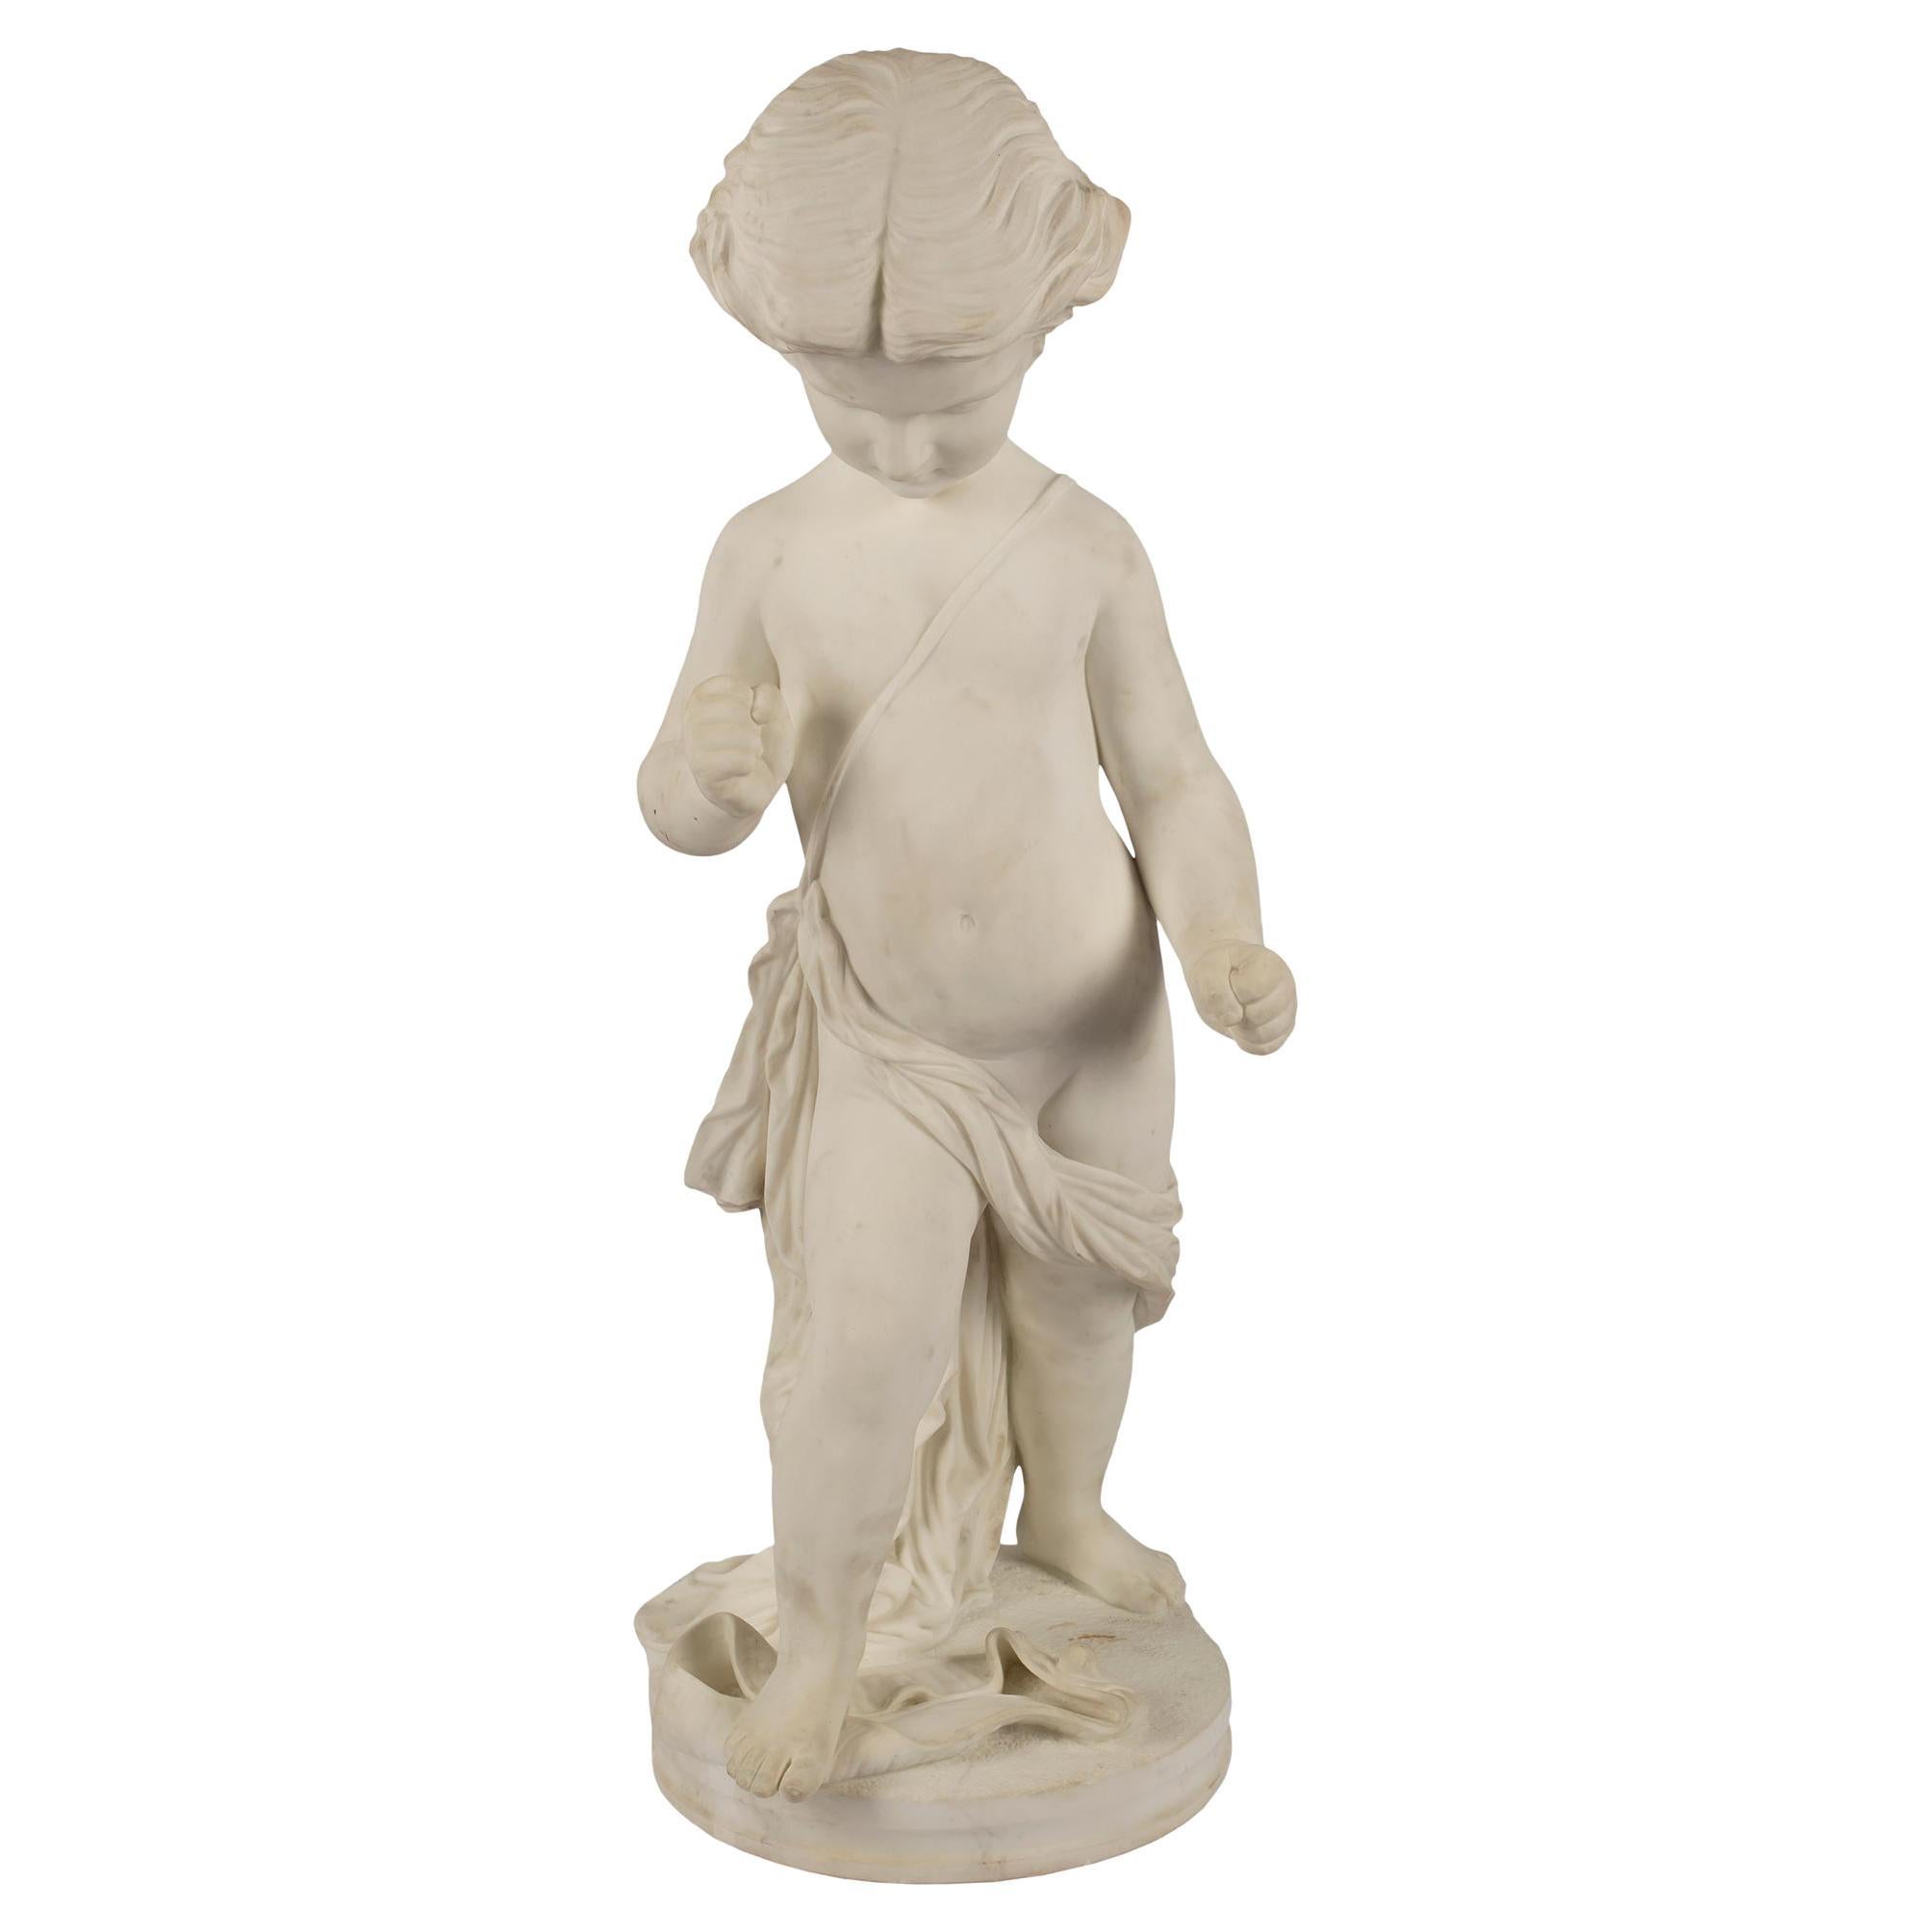 Italian 19th Century White Carrara Marble Statue of a Young Boy